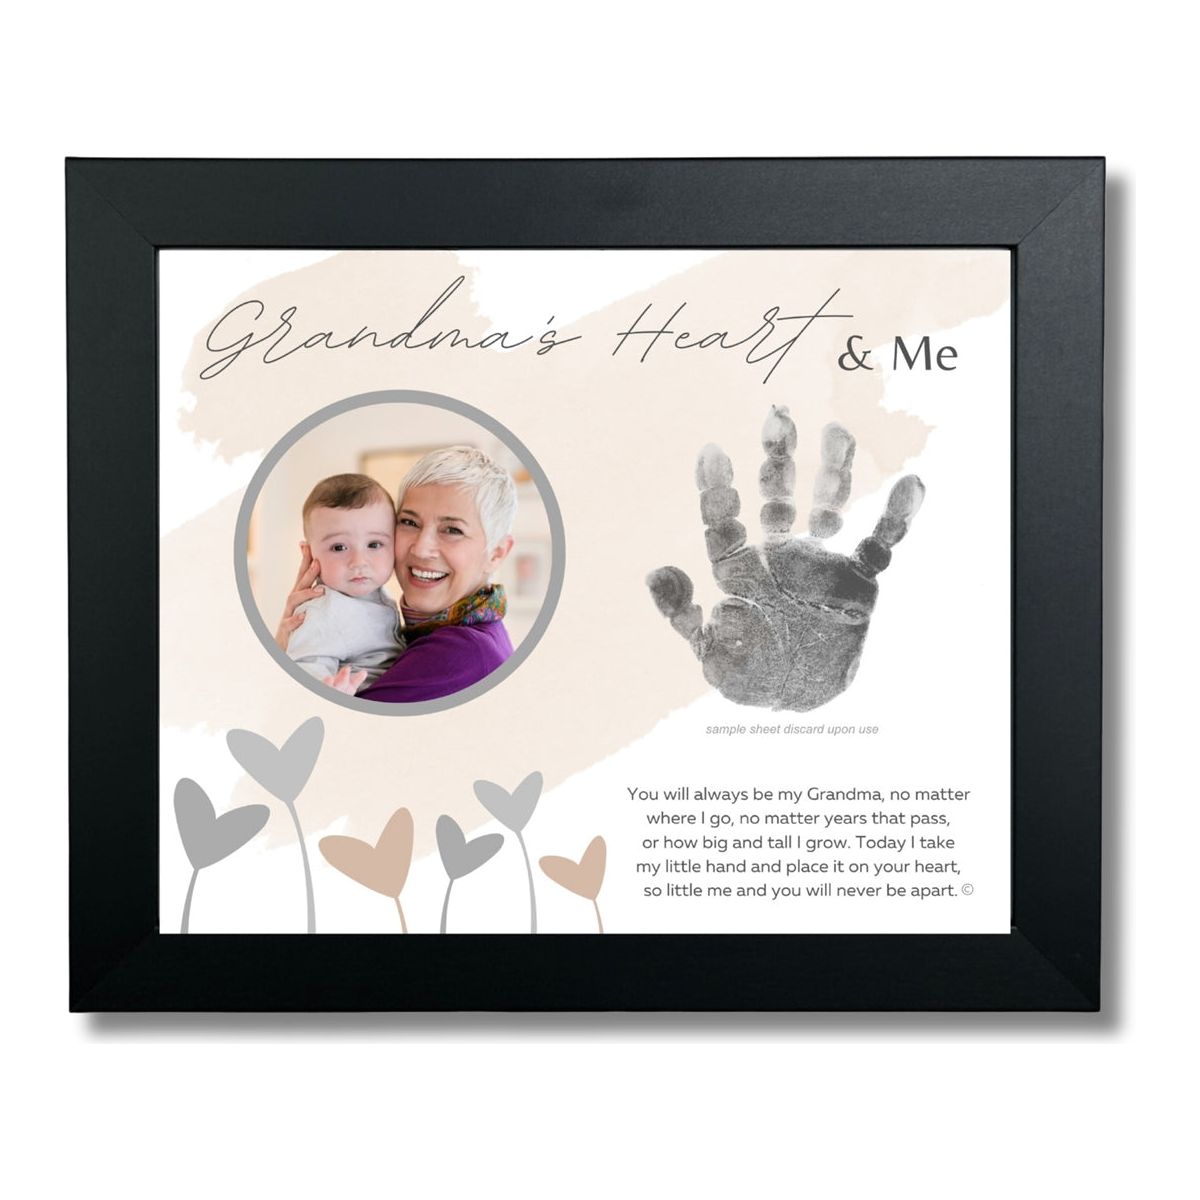 8x10 black frame with "Grandma's Heart & Me" artwork with poem, space for a handprint, and a circular opening for a photograph.